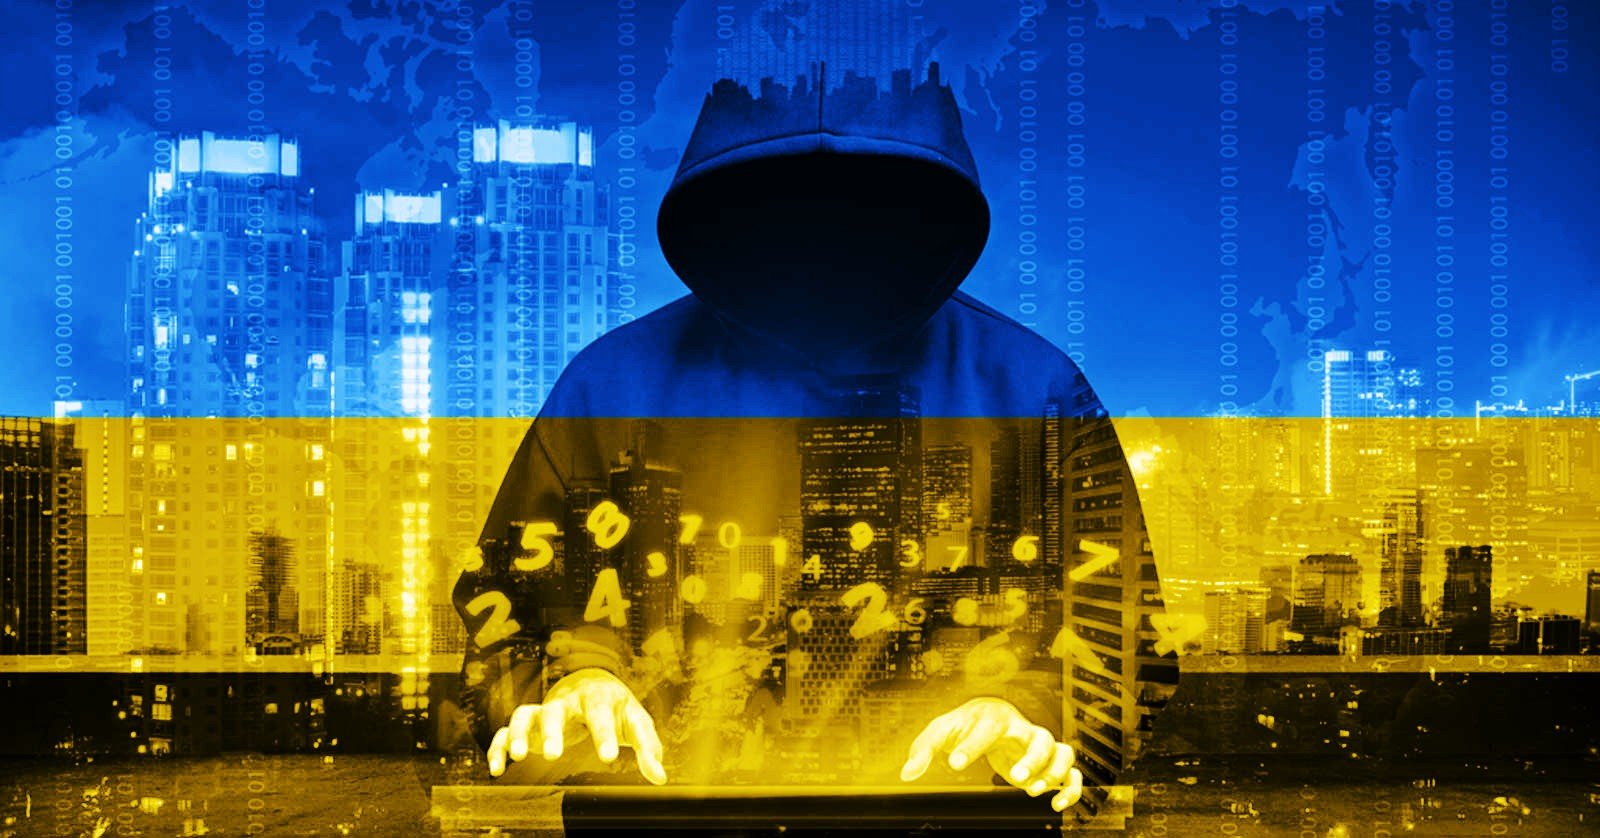 Ukrainian military says it hacked Russia's federal tax agency